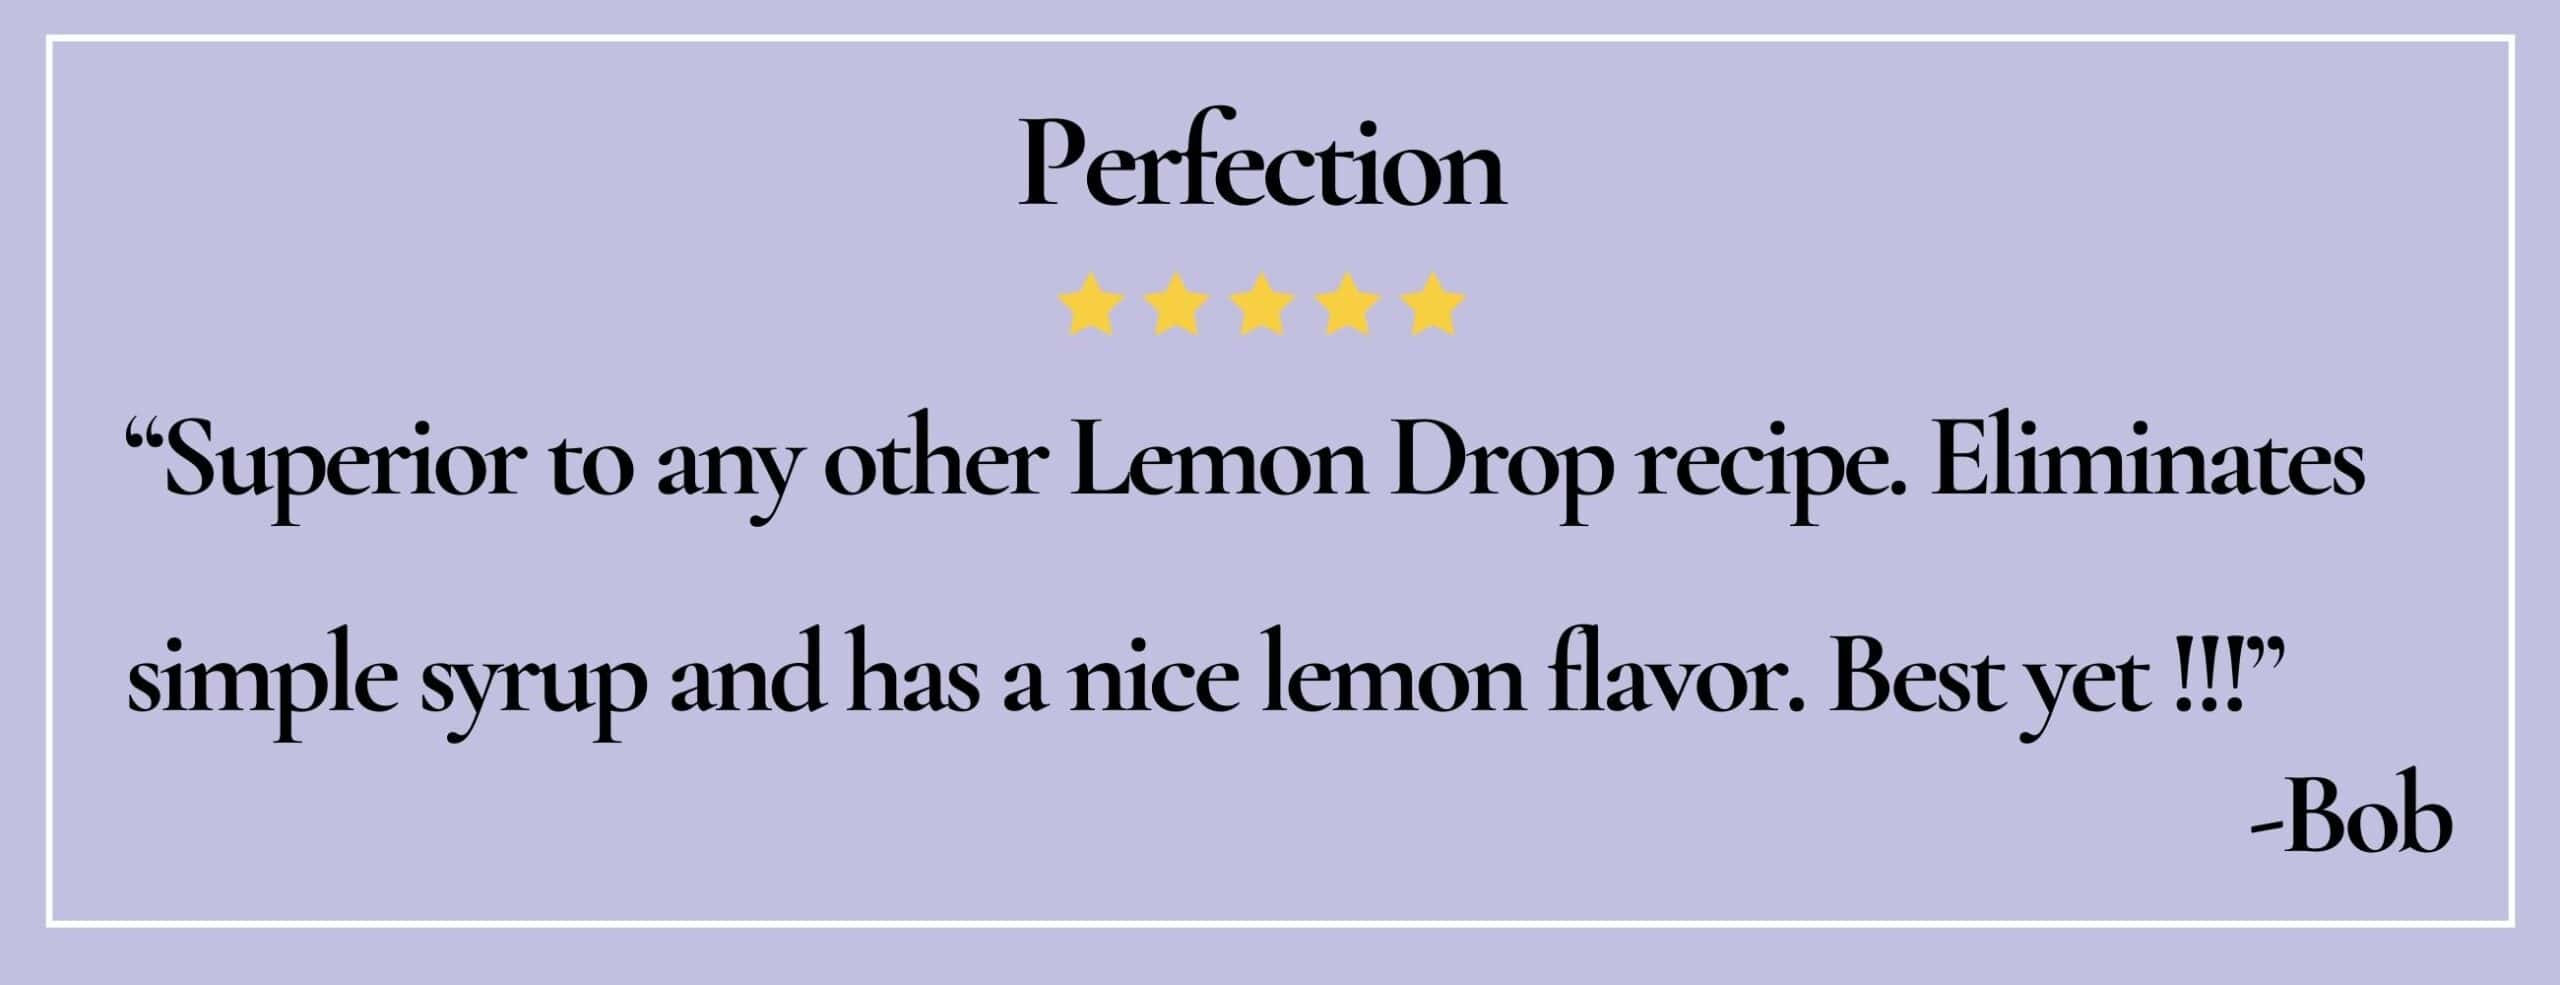 Text box with quote: "Superior to any other Lemon Drop recipe. Eliminates simple syrup and has a nice lemon flavor. Best yet !!!" -Bob